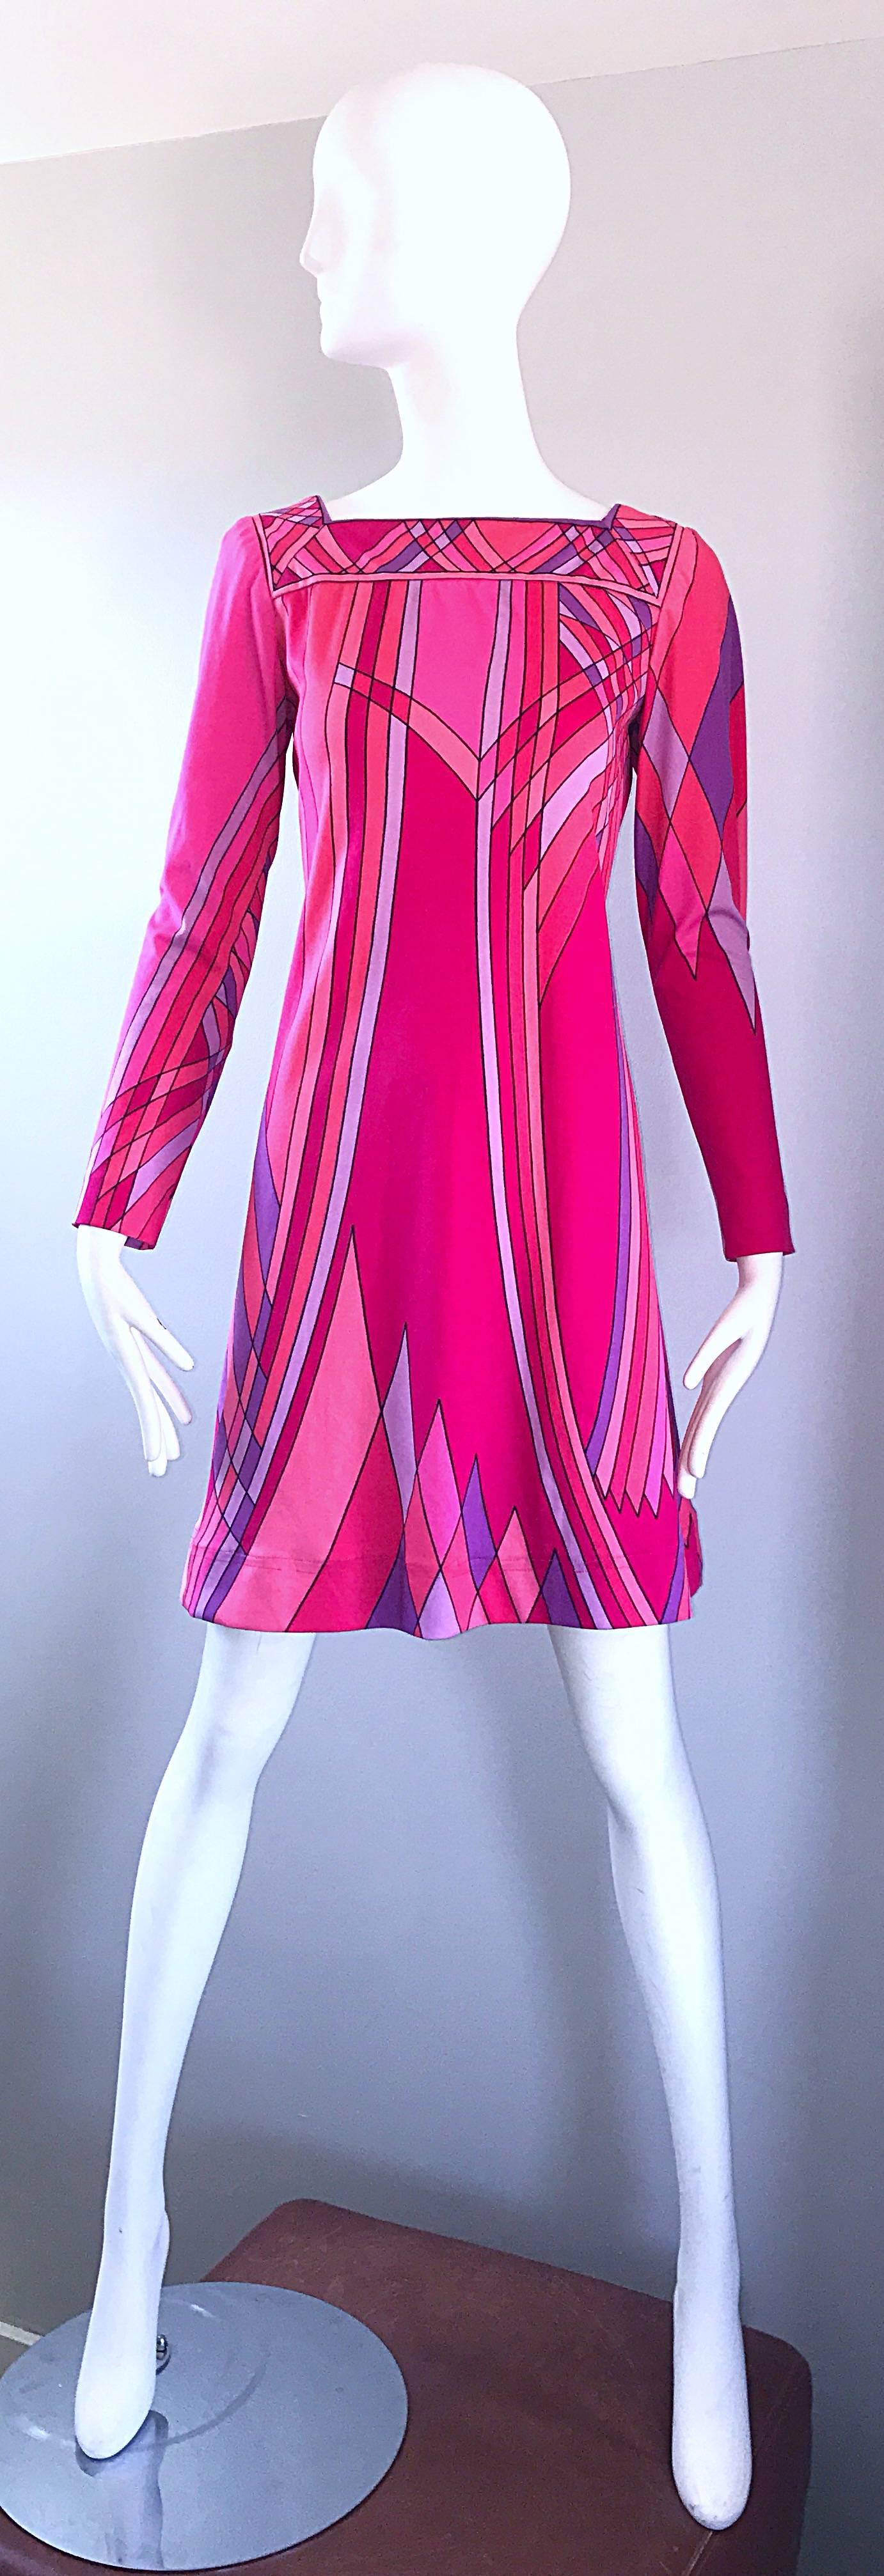 Amazing vintage 60s NAT CAPLAN COUTURE long sleeve A-Line / shift dress! Features a shocking hot pink background with geometric mosaic print in fuchsia, lavender and purple. Tailored bodice with a nice flared skirt. Long tailored sleeves. Jersey